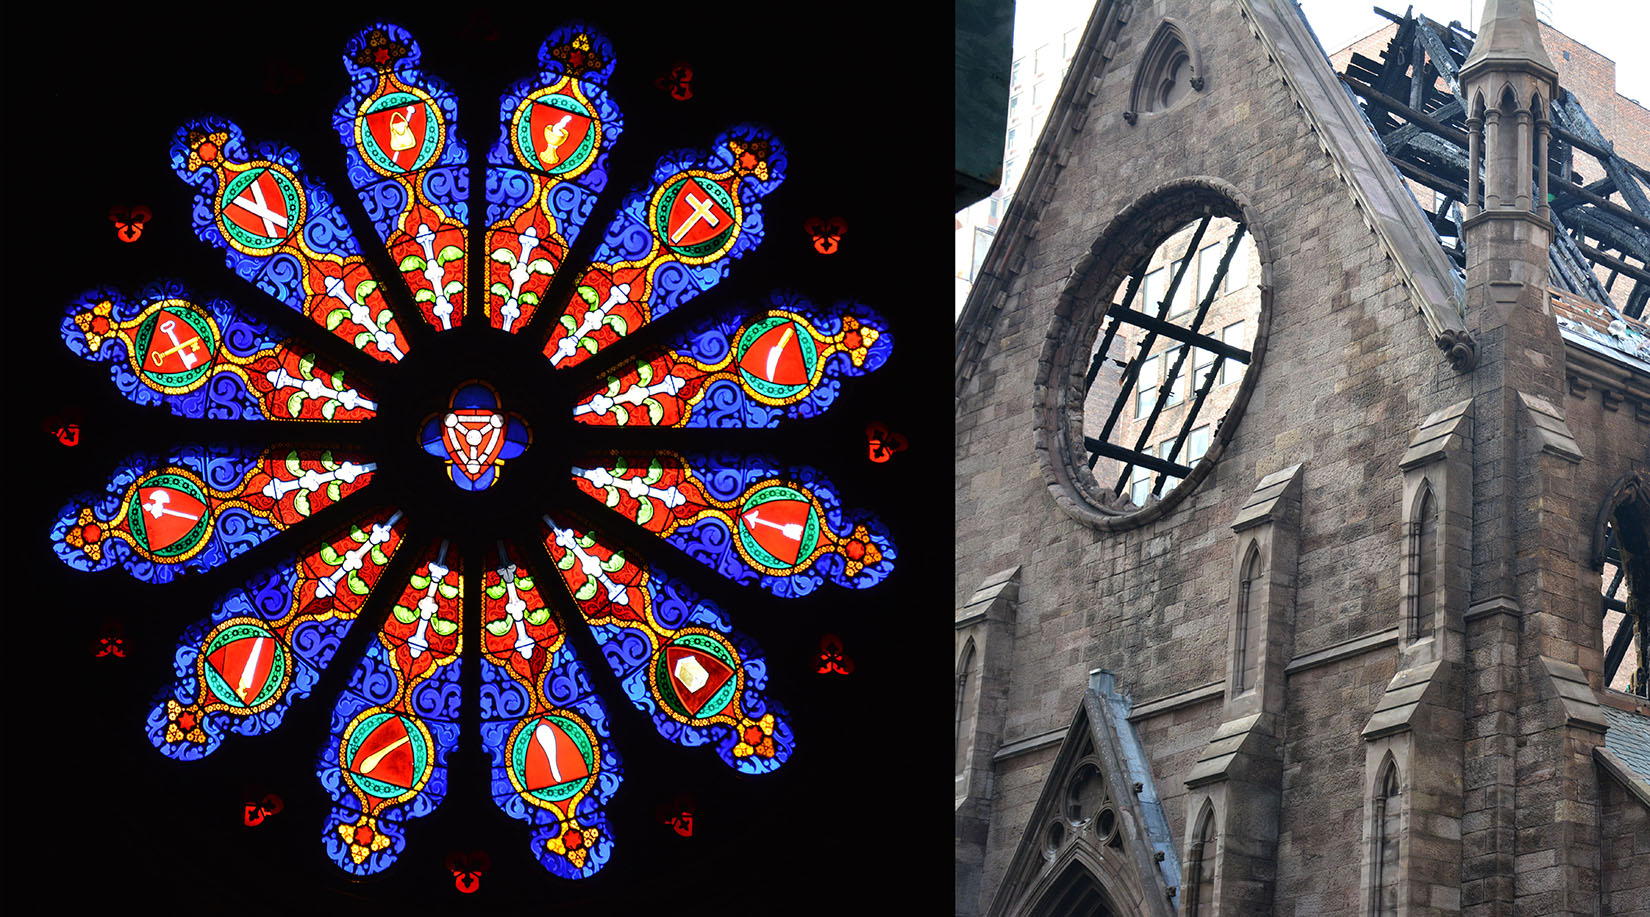 Rose Window - before and after fire